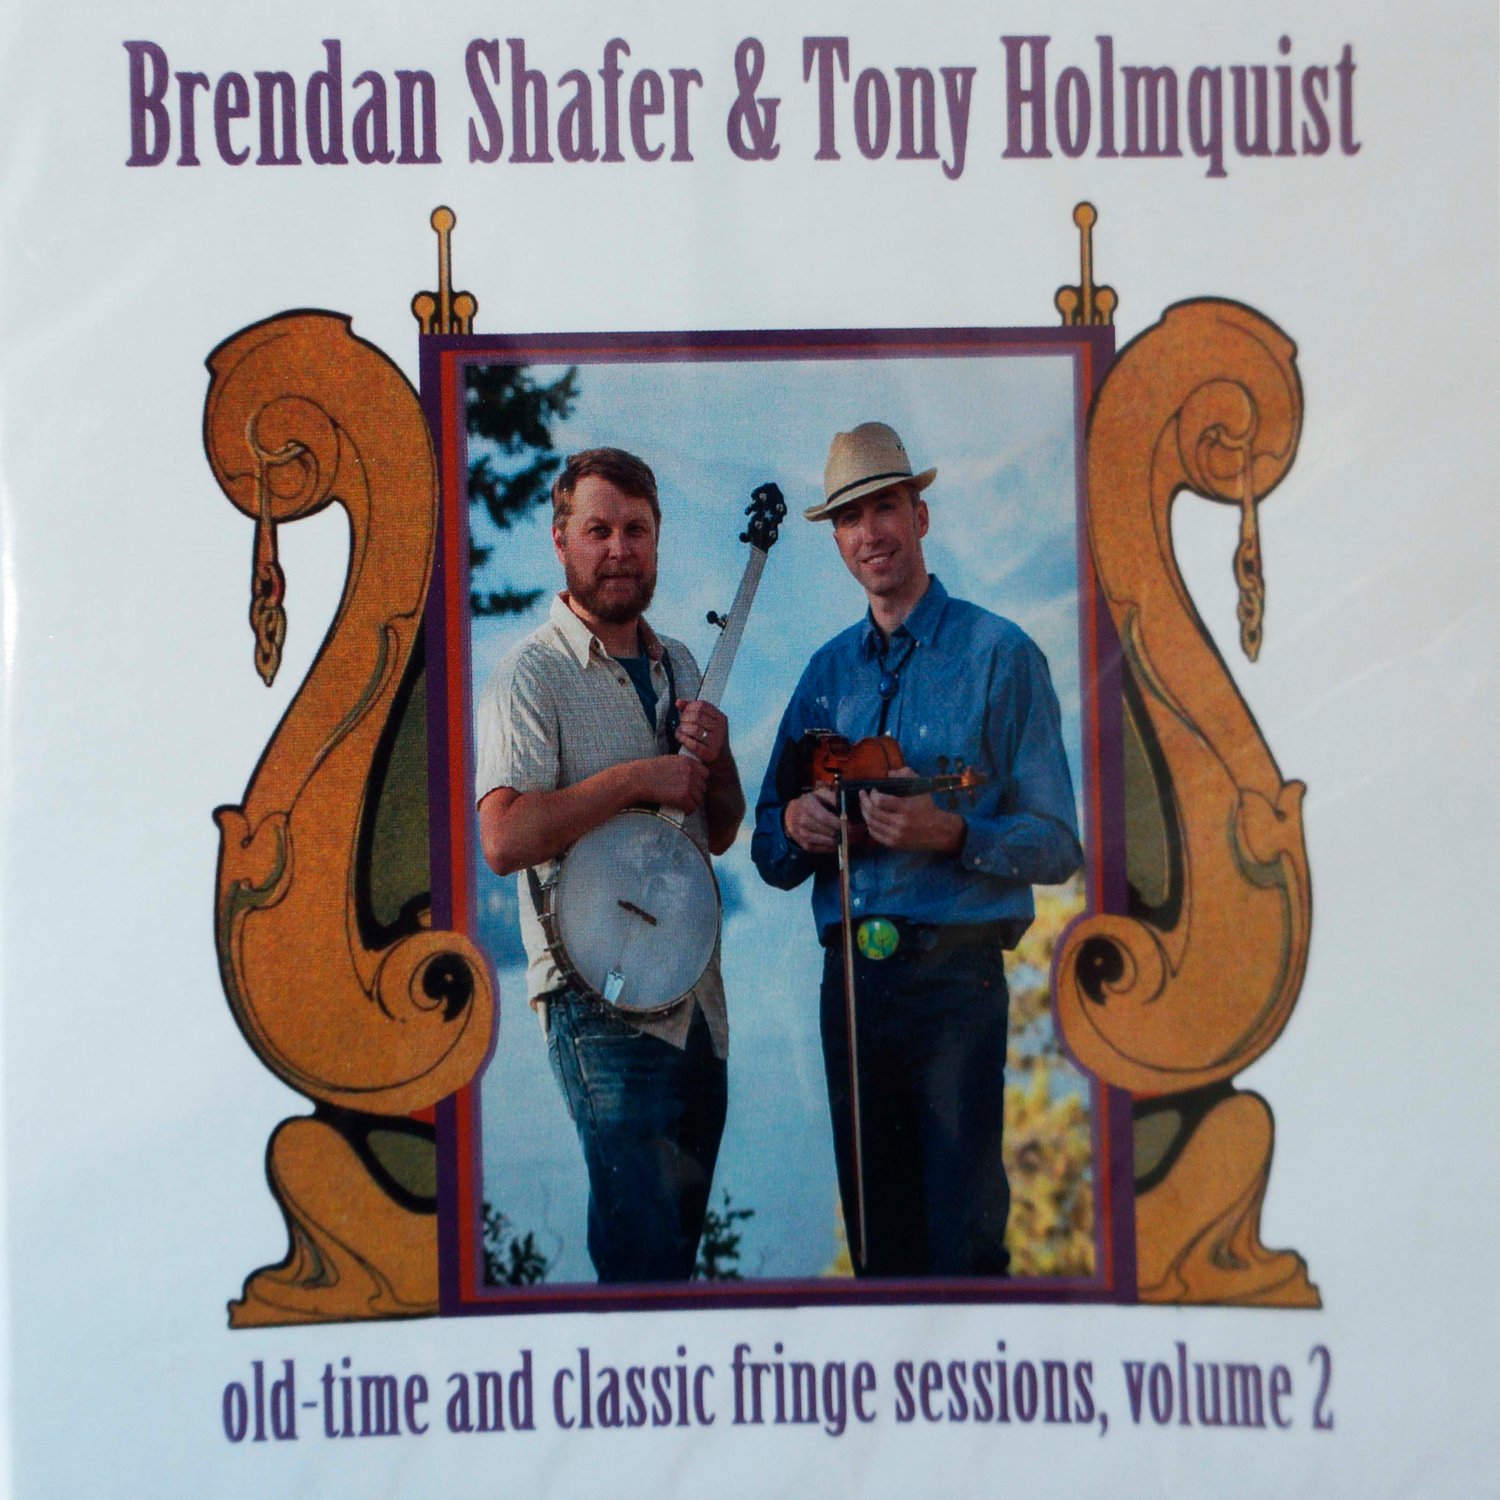 "Old-Time and Classic Fringe Sessions Volume 2" CD by Brendan Shafer & Tony Holmquist